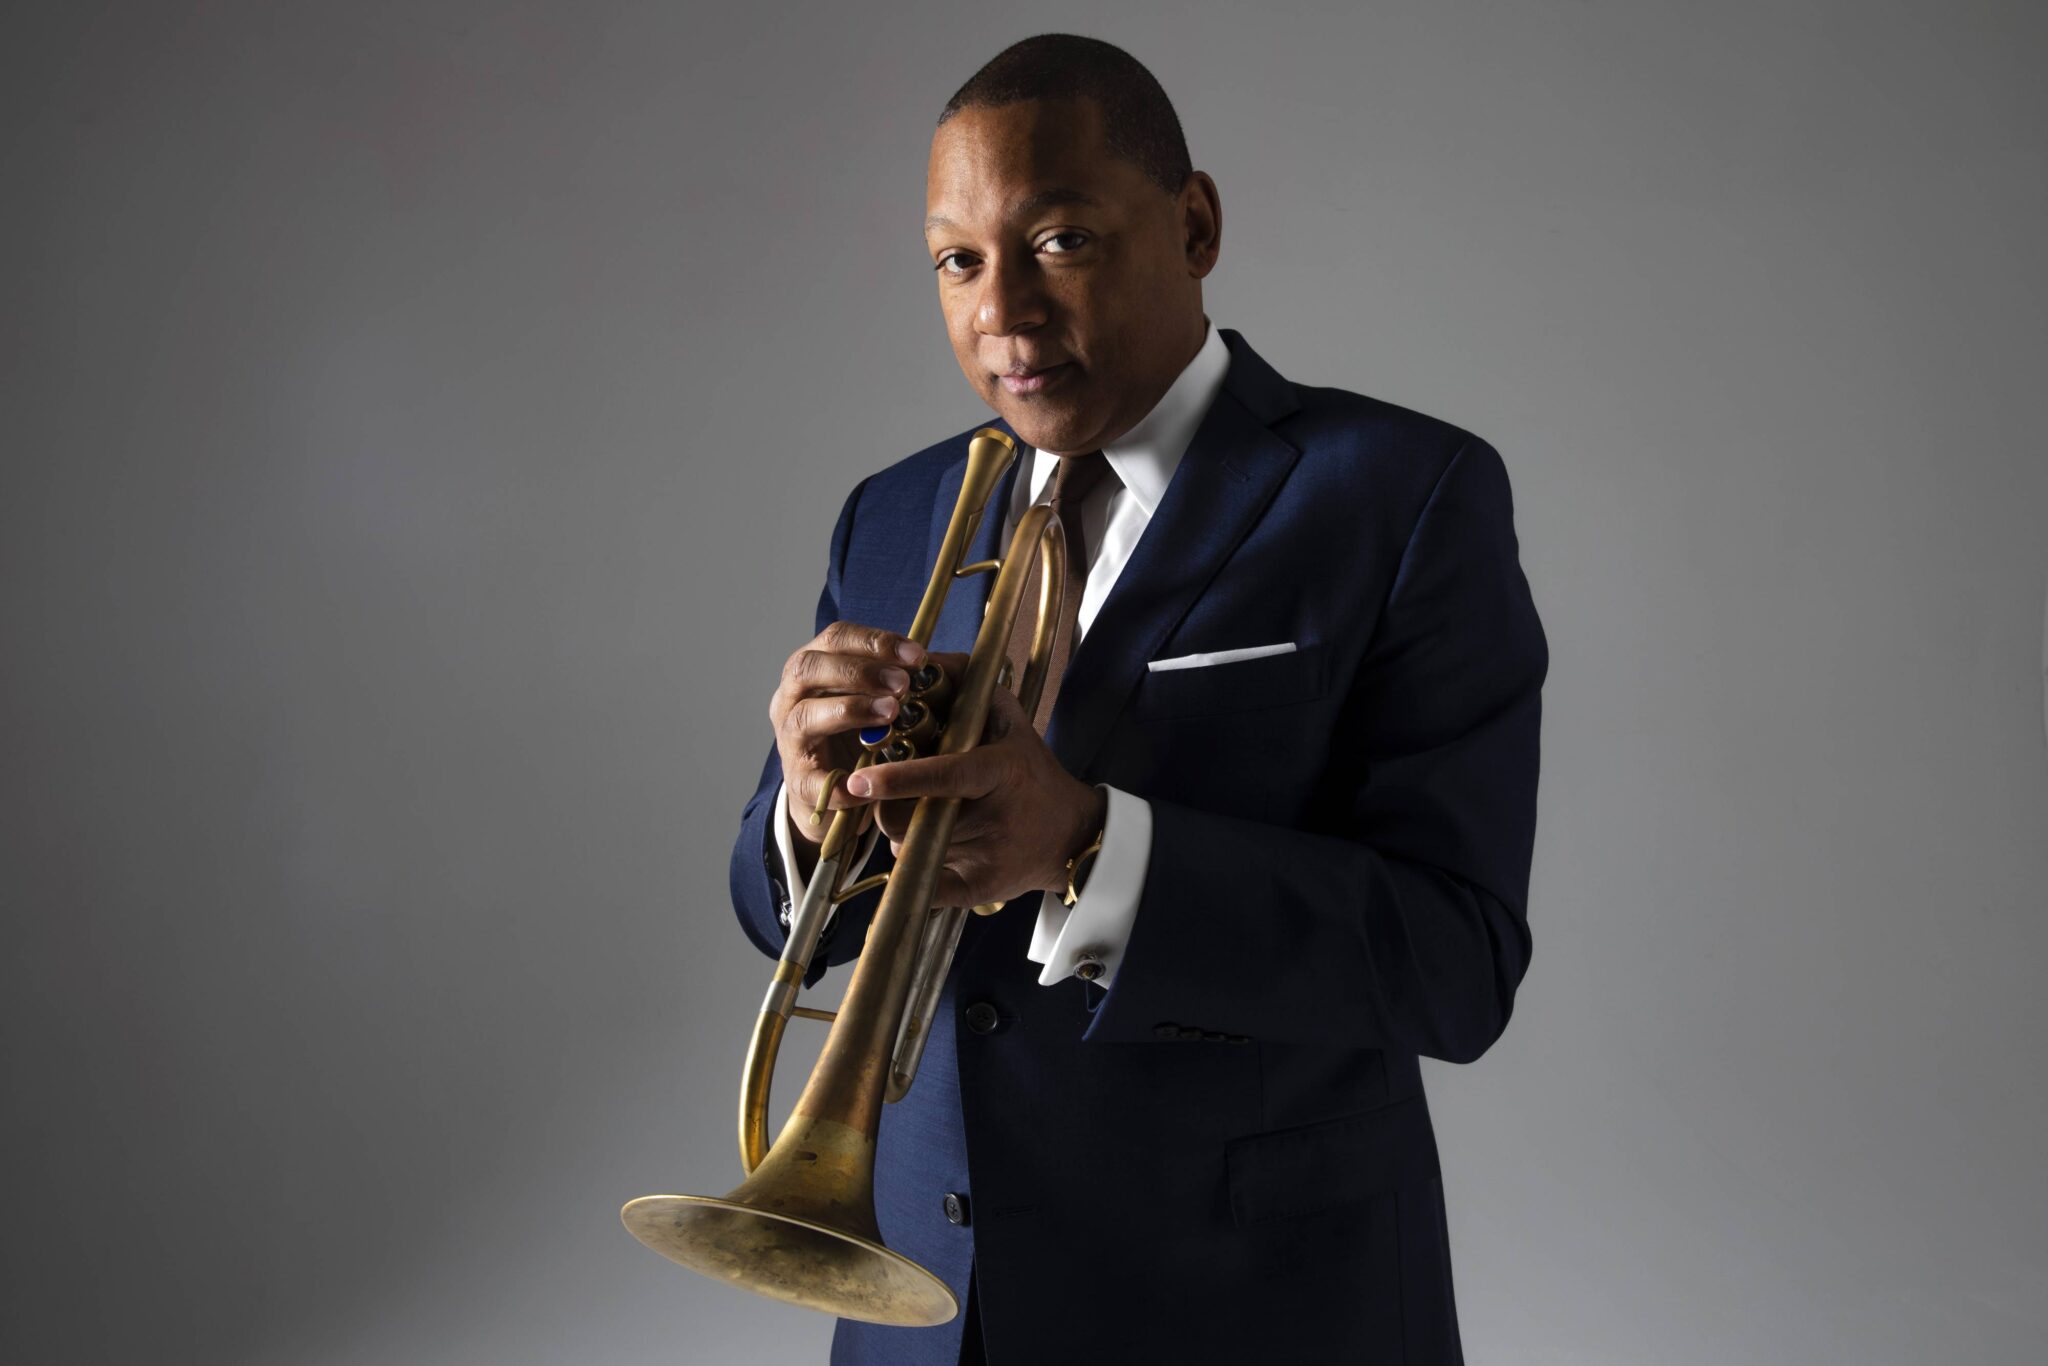 Iconic Jazz Trumpeter Wynton Marsalis Talks Current State of Jazz, Improv & Role As Agent For Change (INTERVIEW)